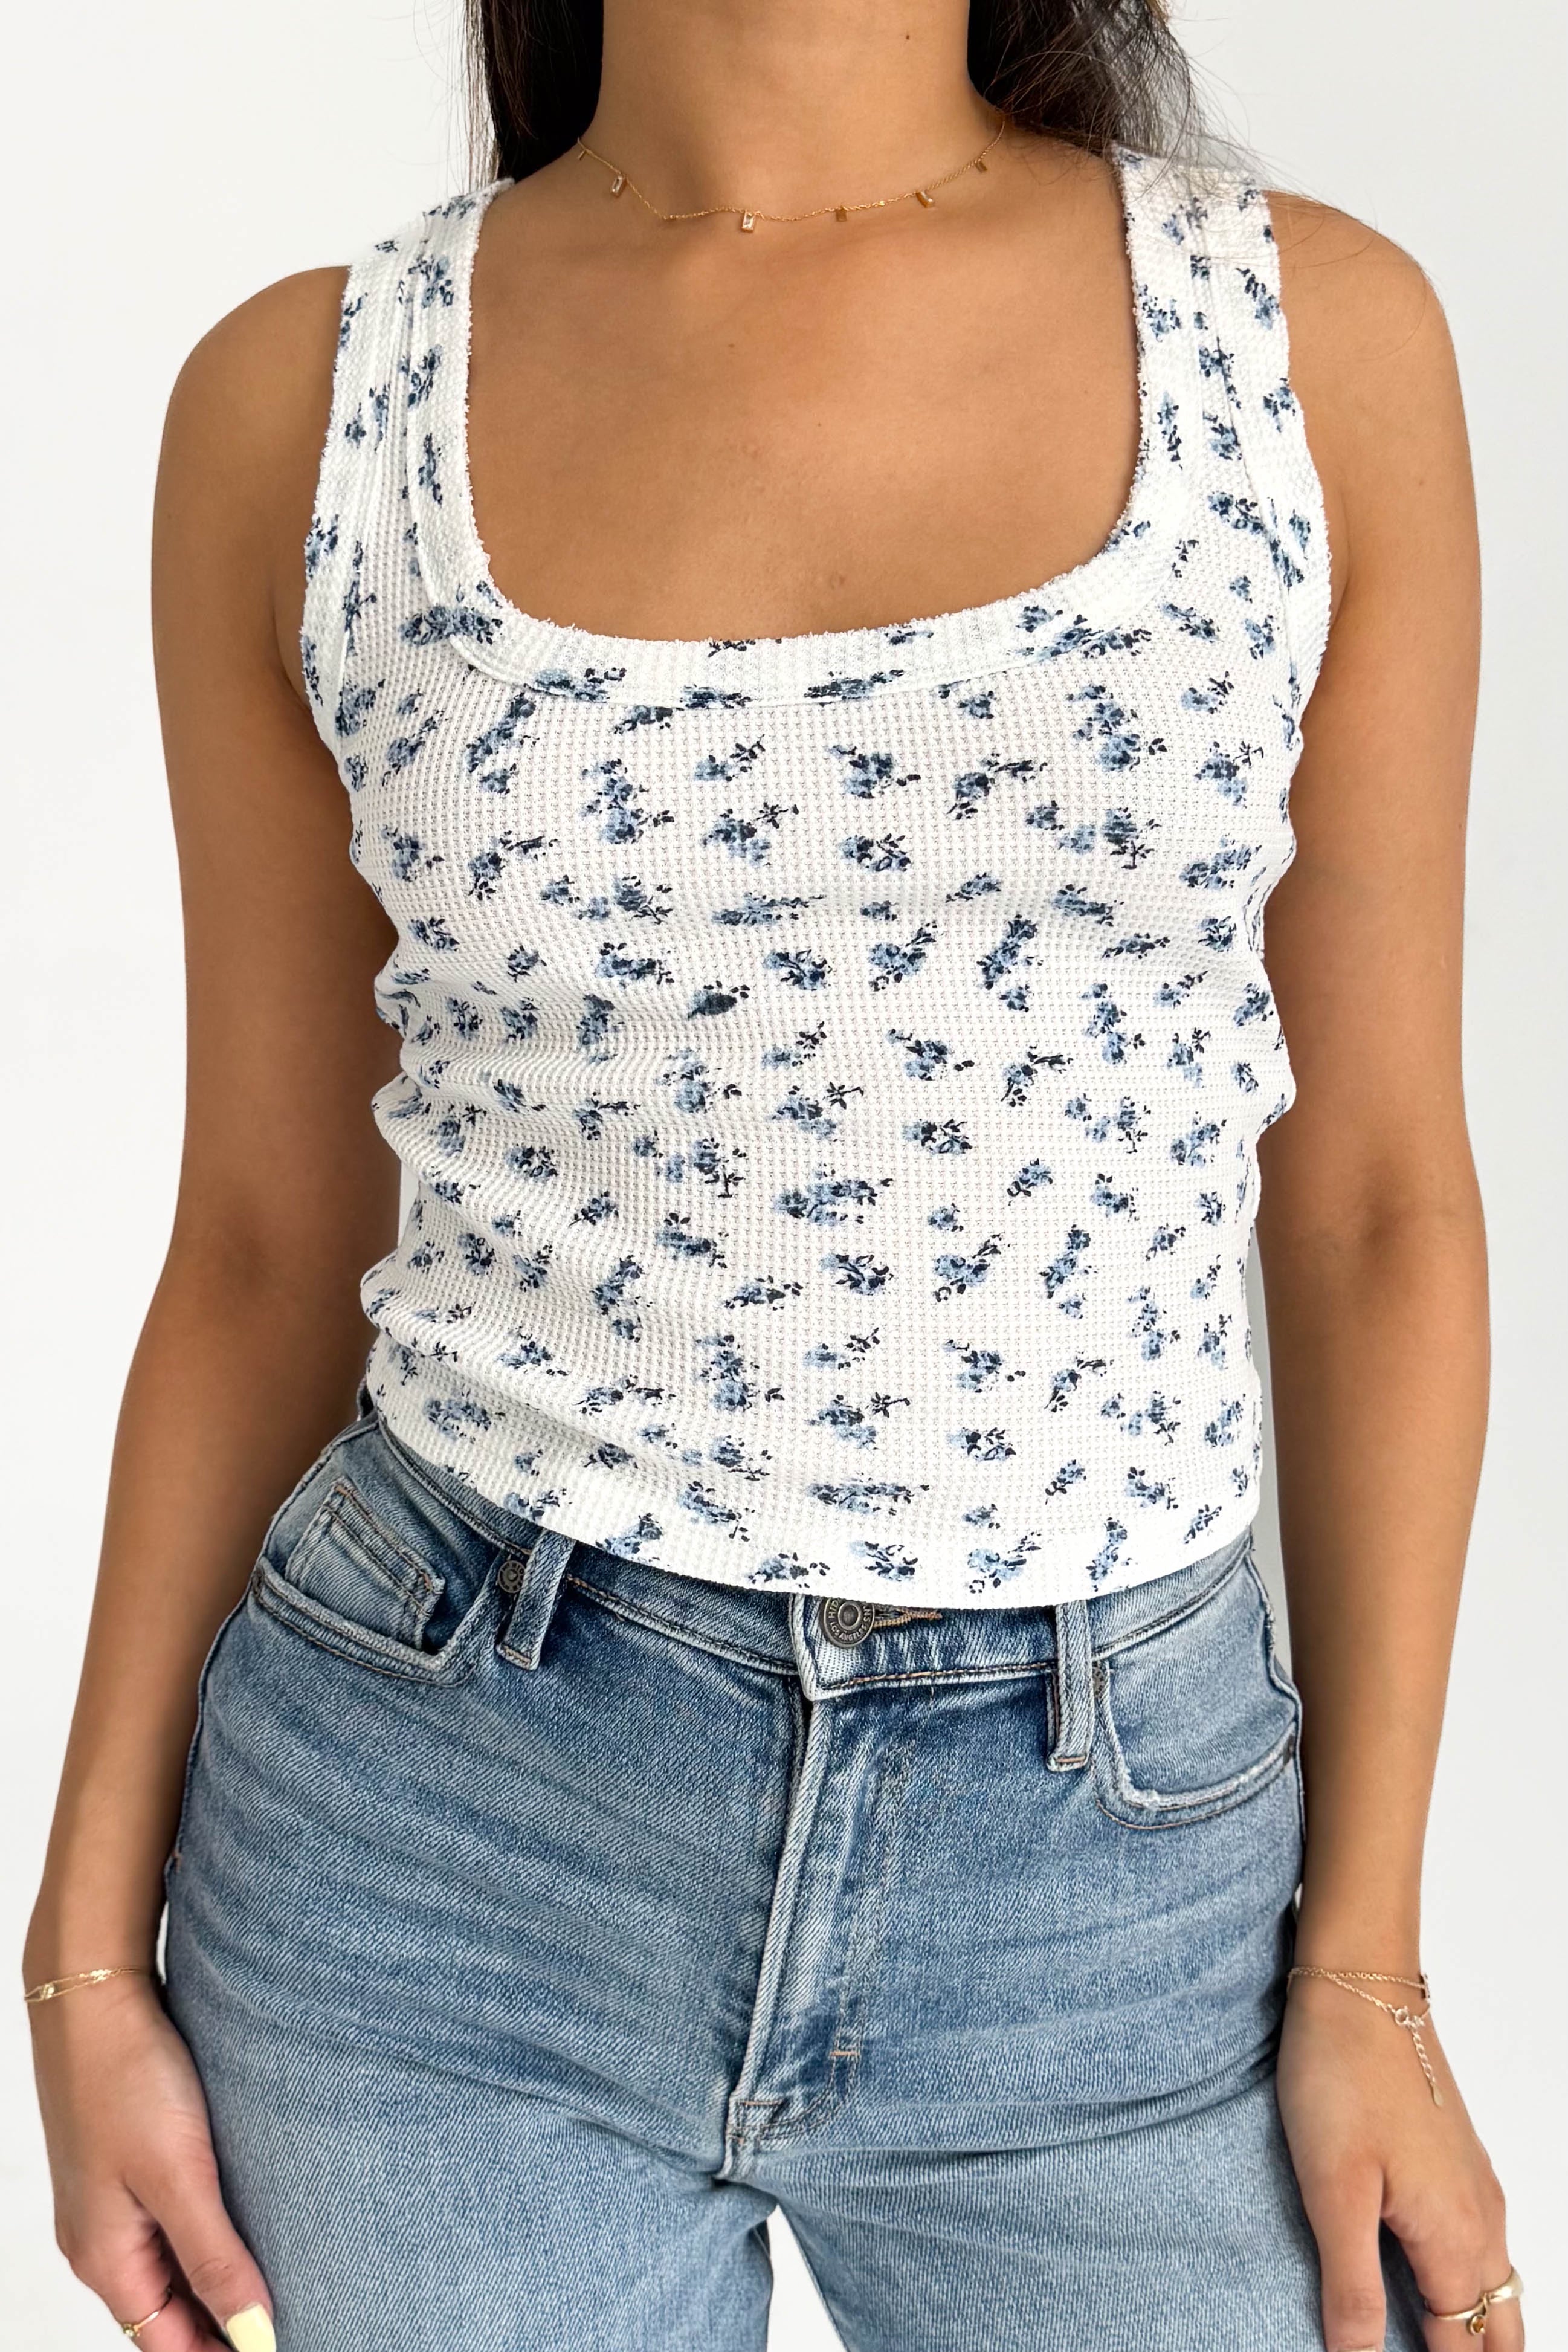 Daisy Tank in Blue Floral